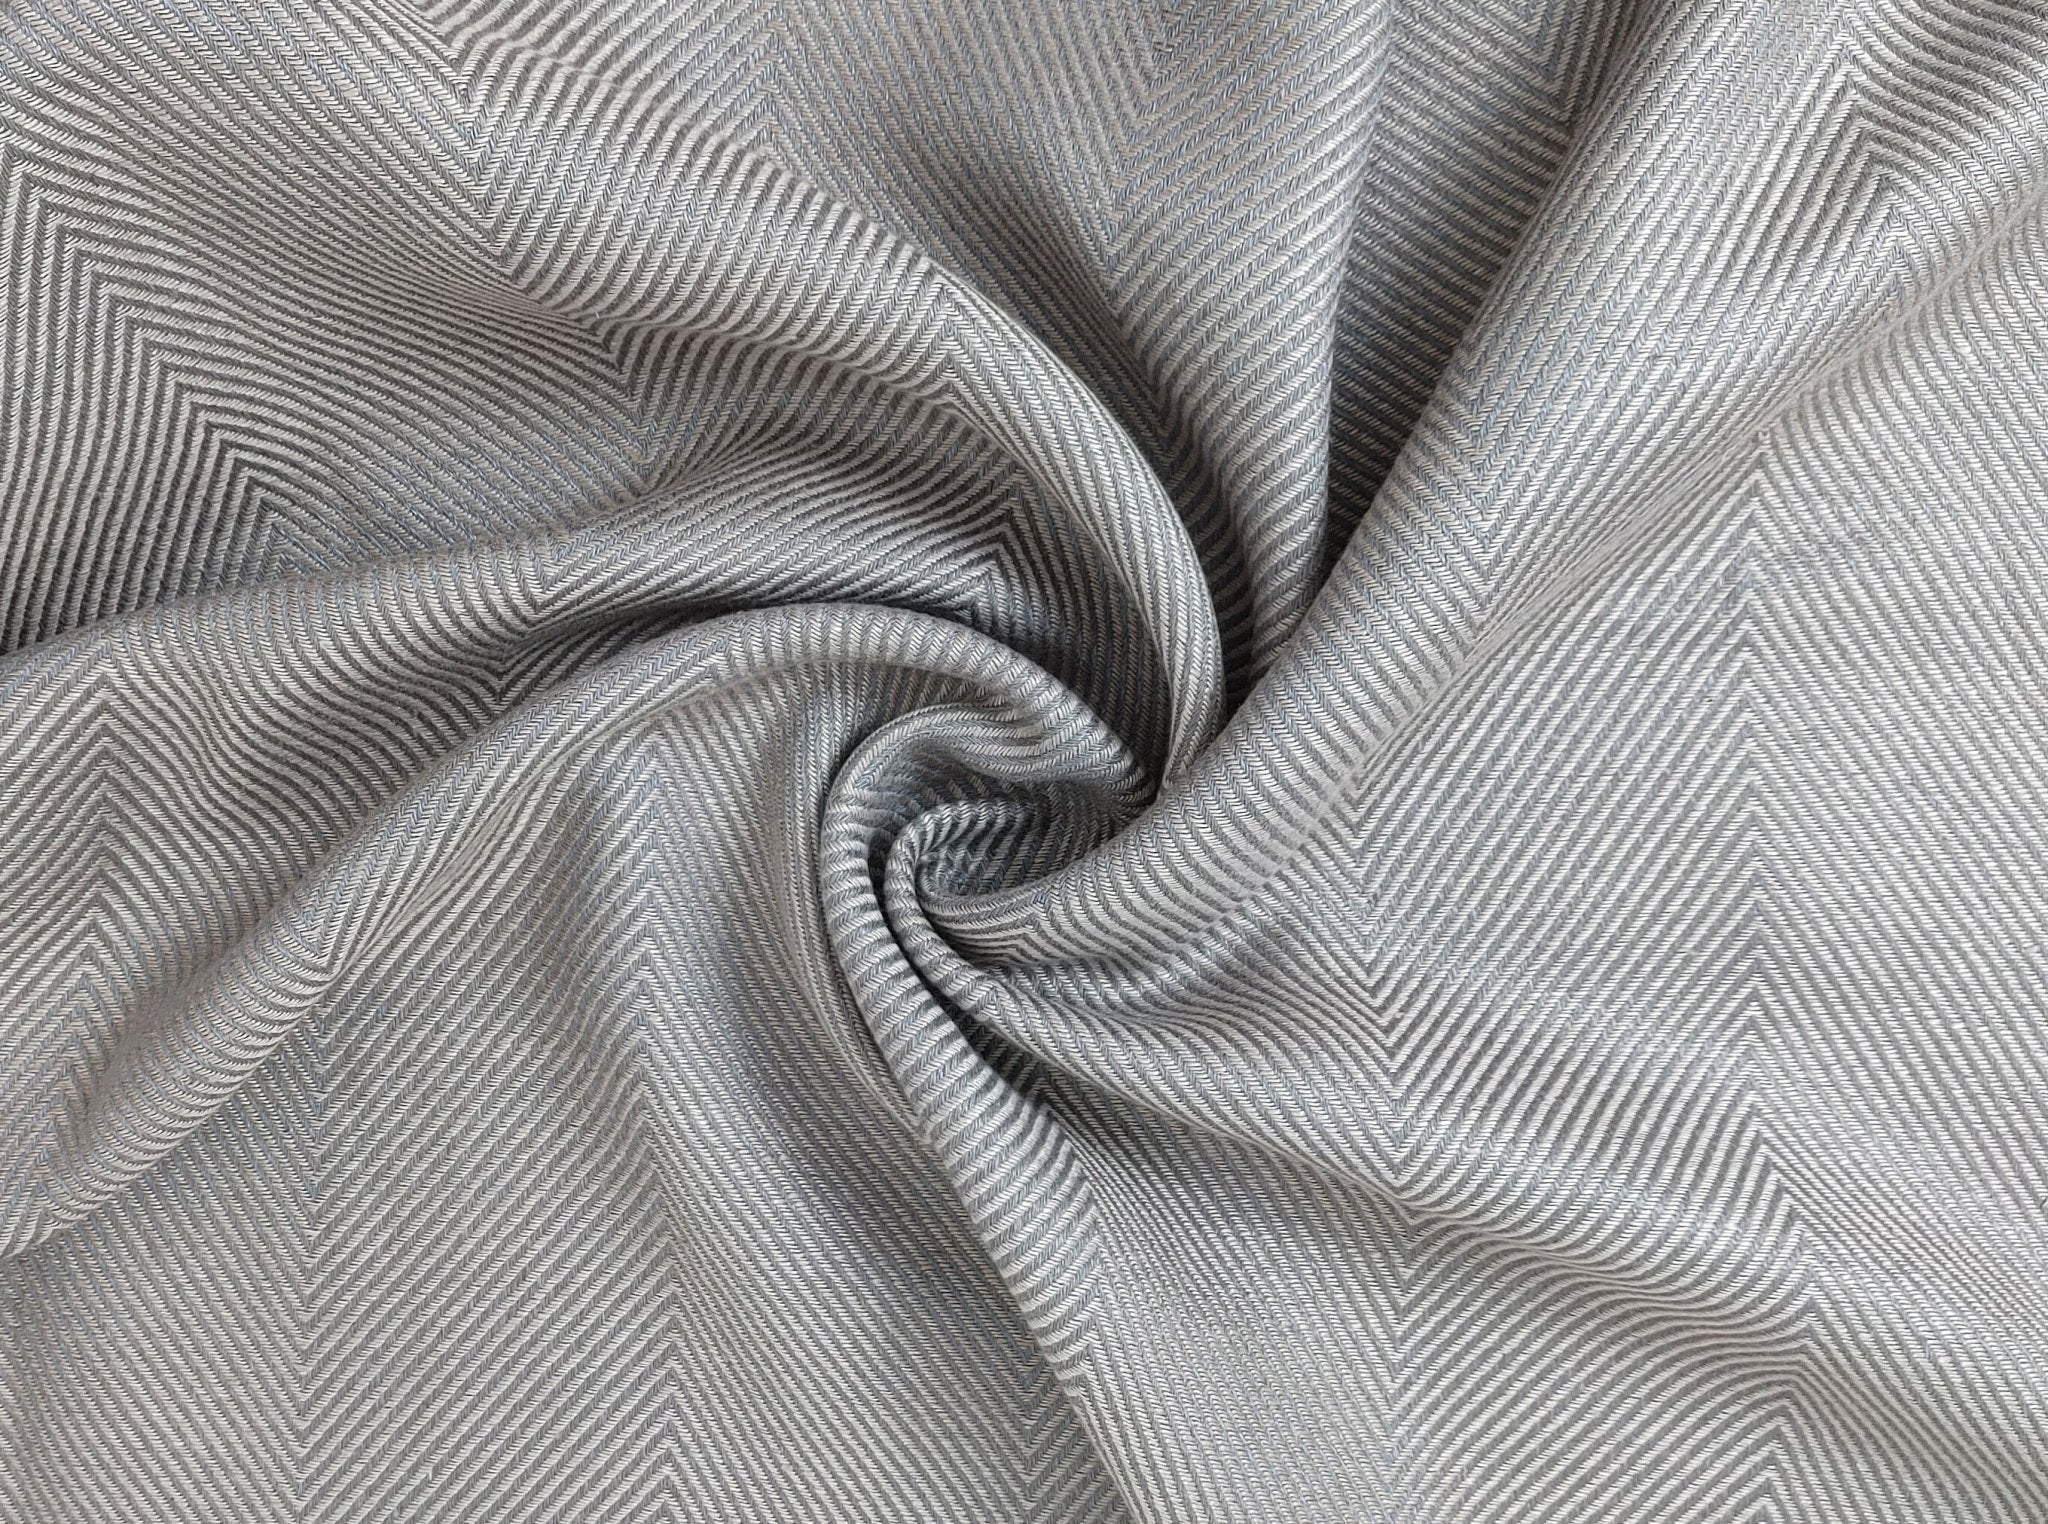 Luxurious Linen-Rayon HBT Fabric: Big Size with Two-Tone Chambray Design 6062 6063 - The Linen Lab - Beige